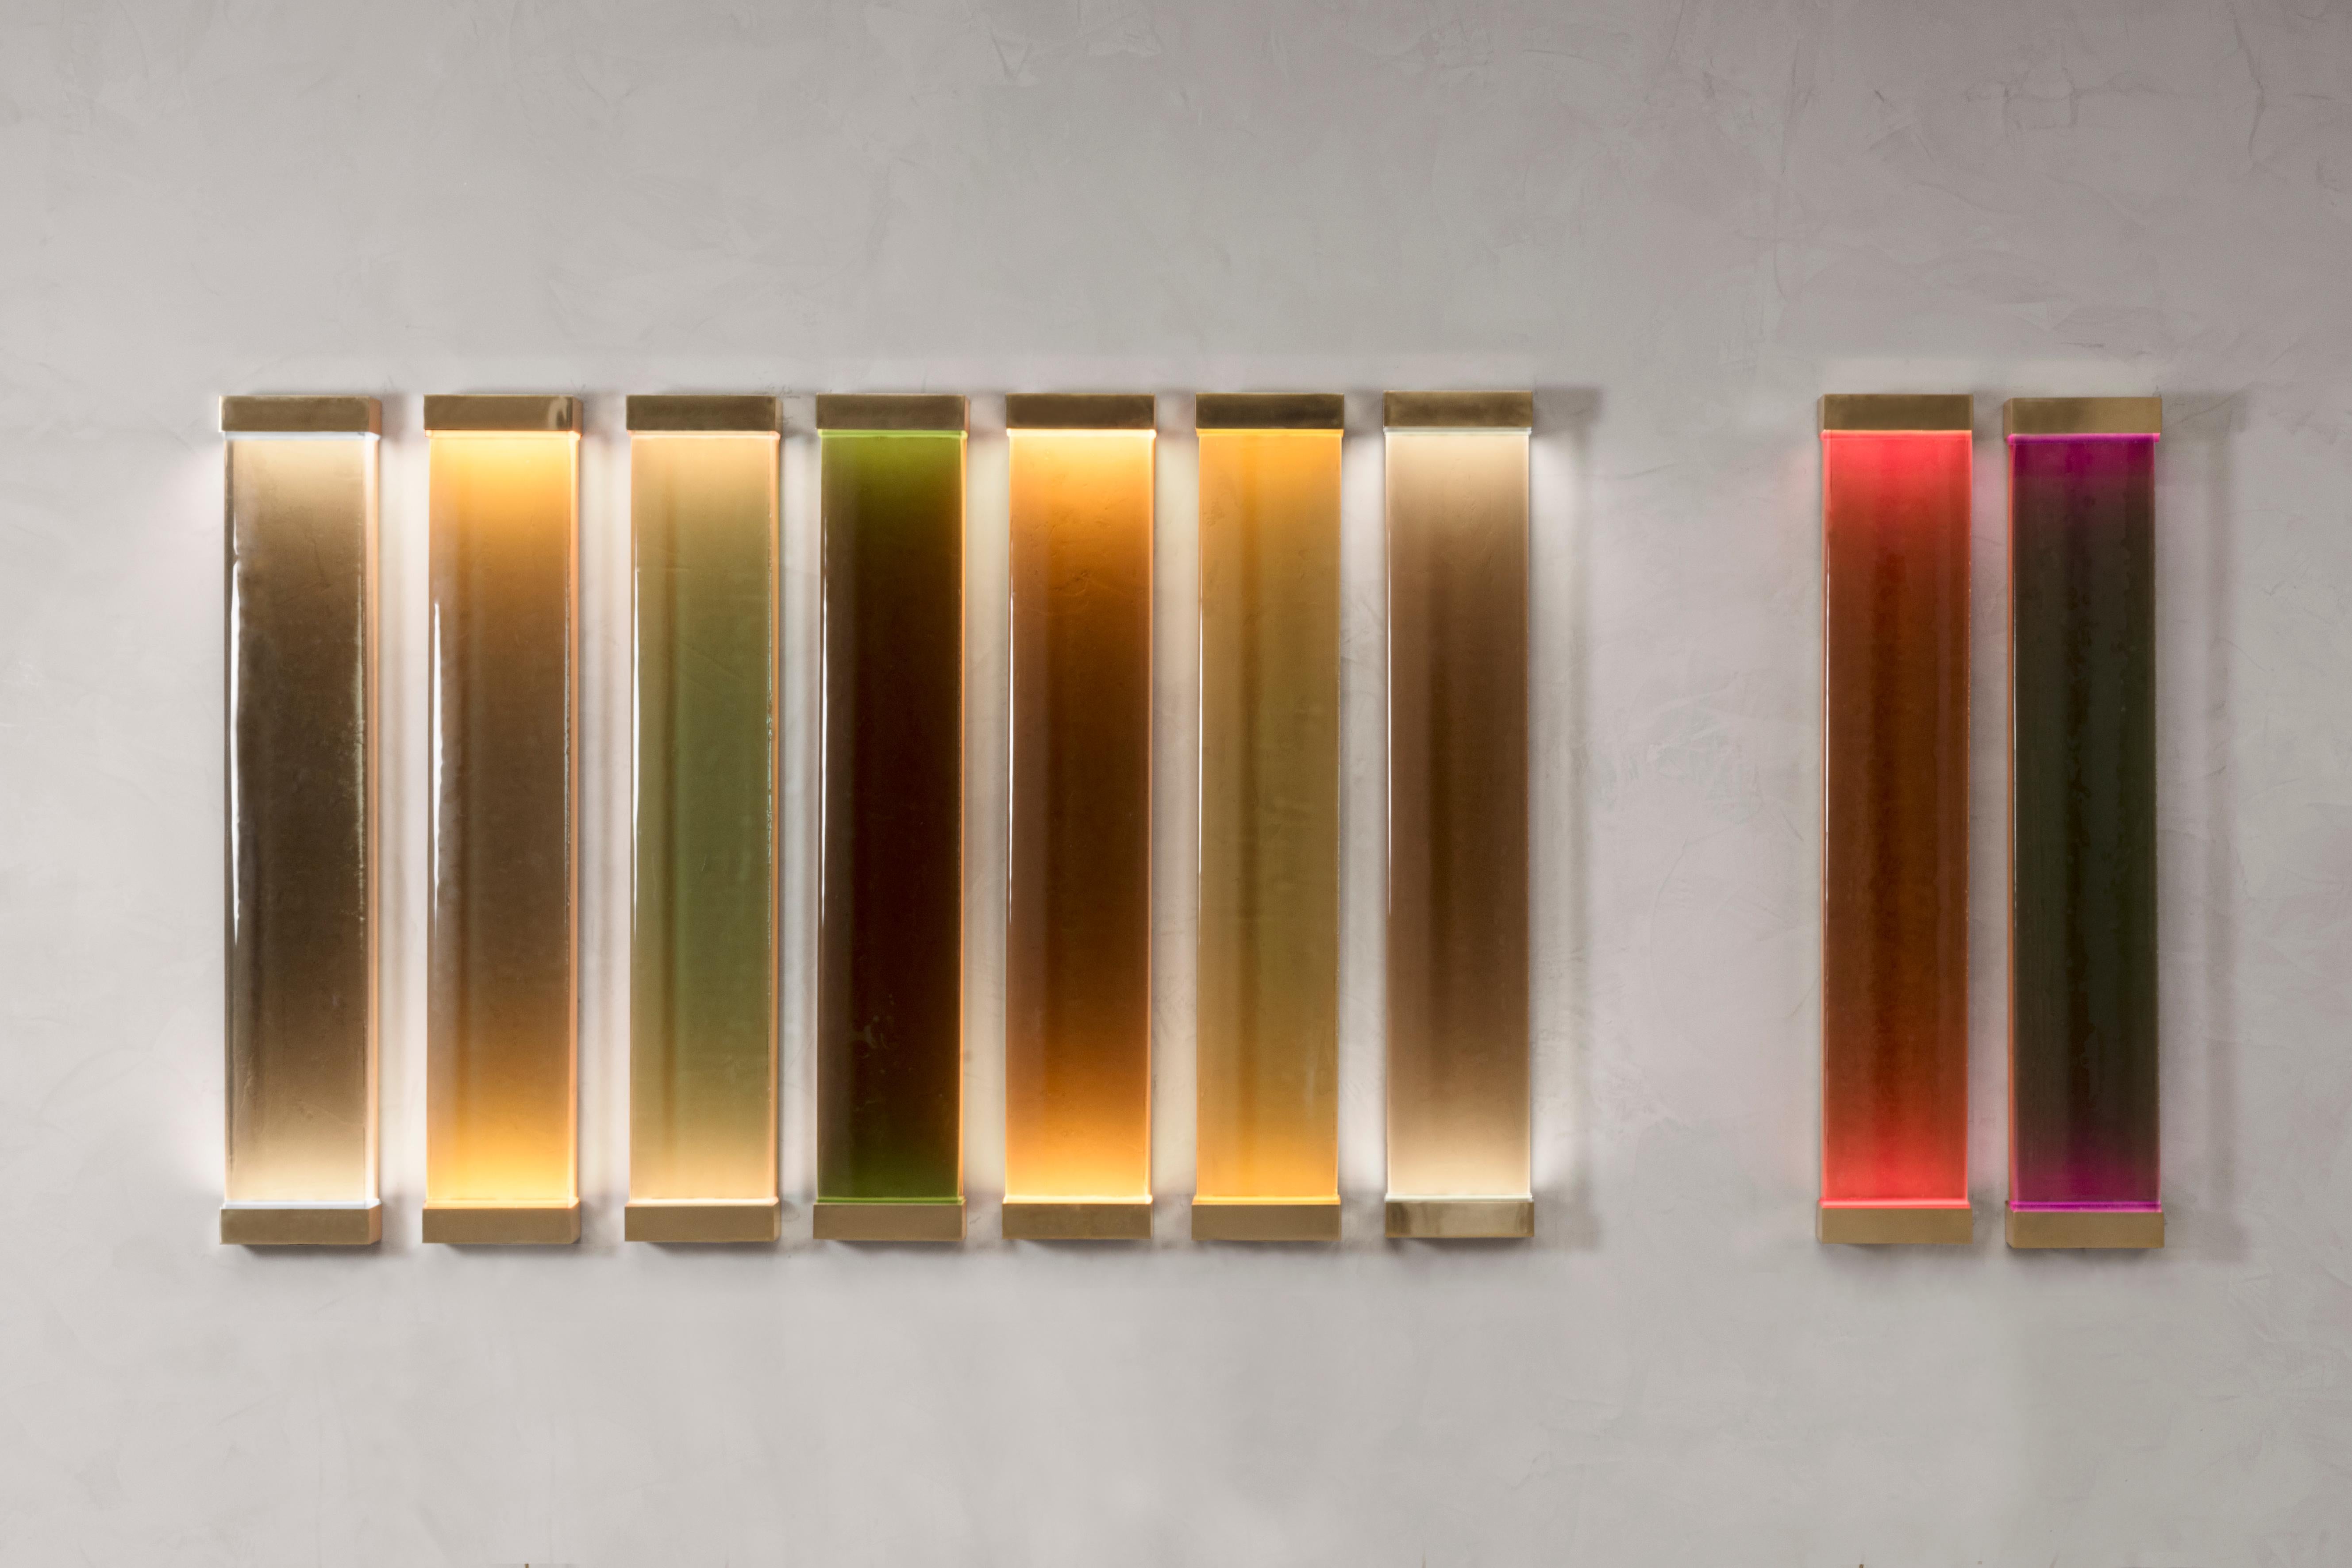 Drawing inspiration from minimalism, Jud lamps pay tribute to artist Donald Judd. The various shades of translucent glass and resin filters have been melded together to create a cohesive and balanced color scheme. Each piece consists of a brass